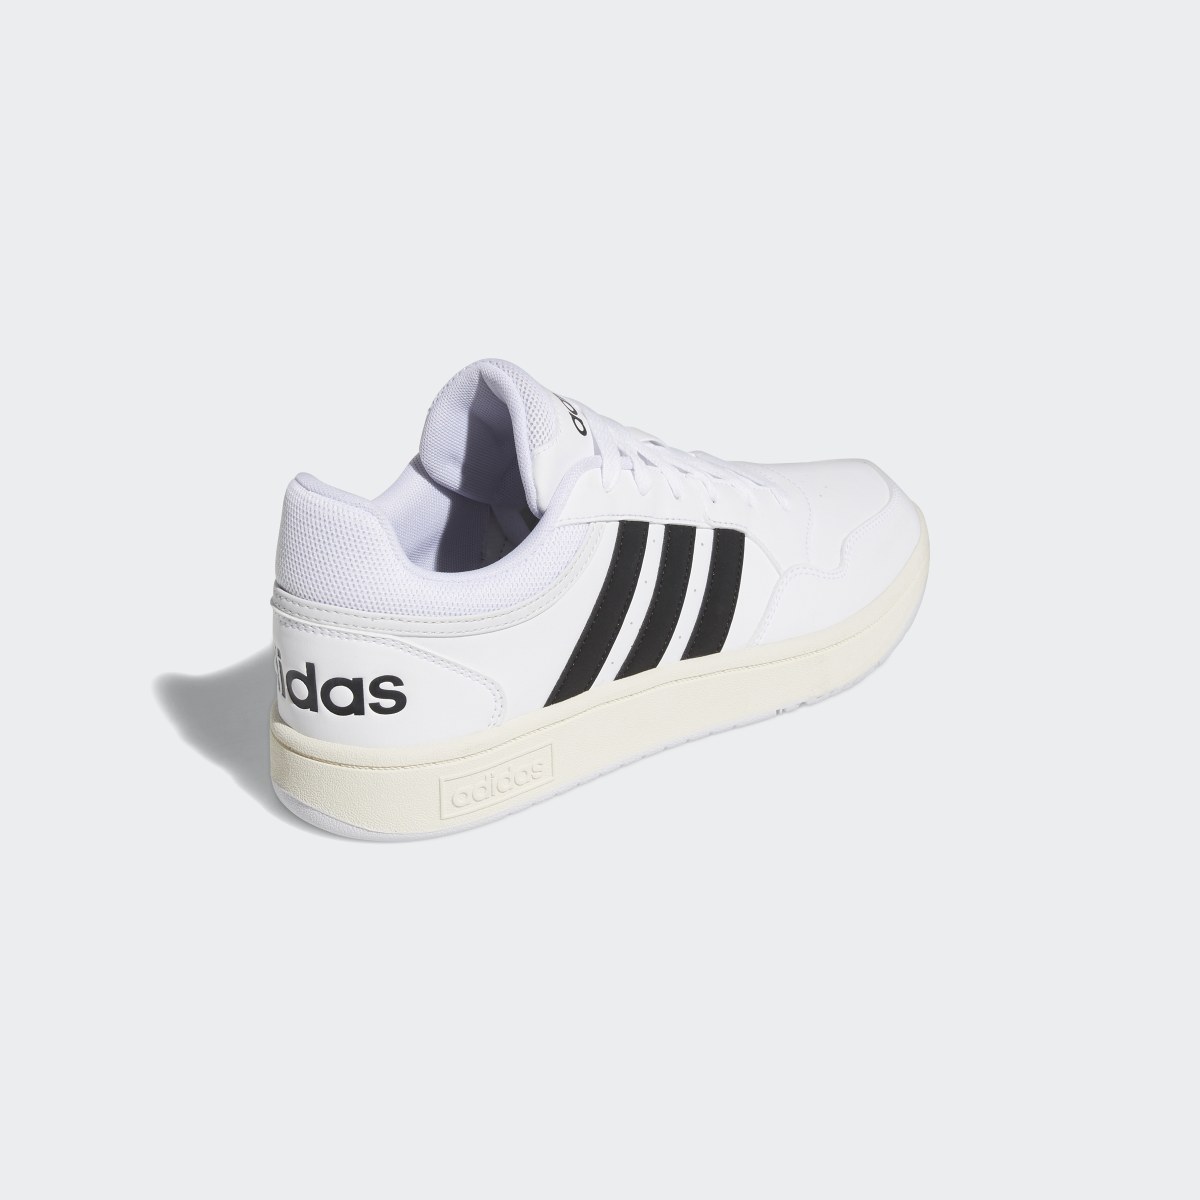 Adidas Hoops 3.0 Low Classic Vintage Schuh. 6